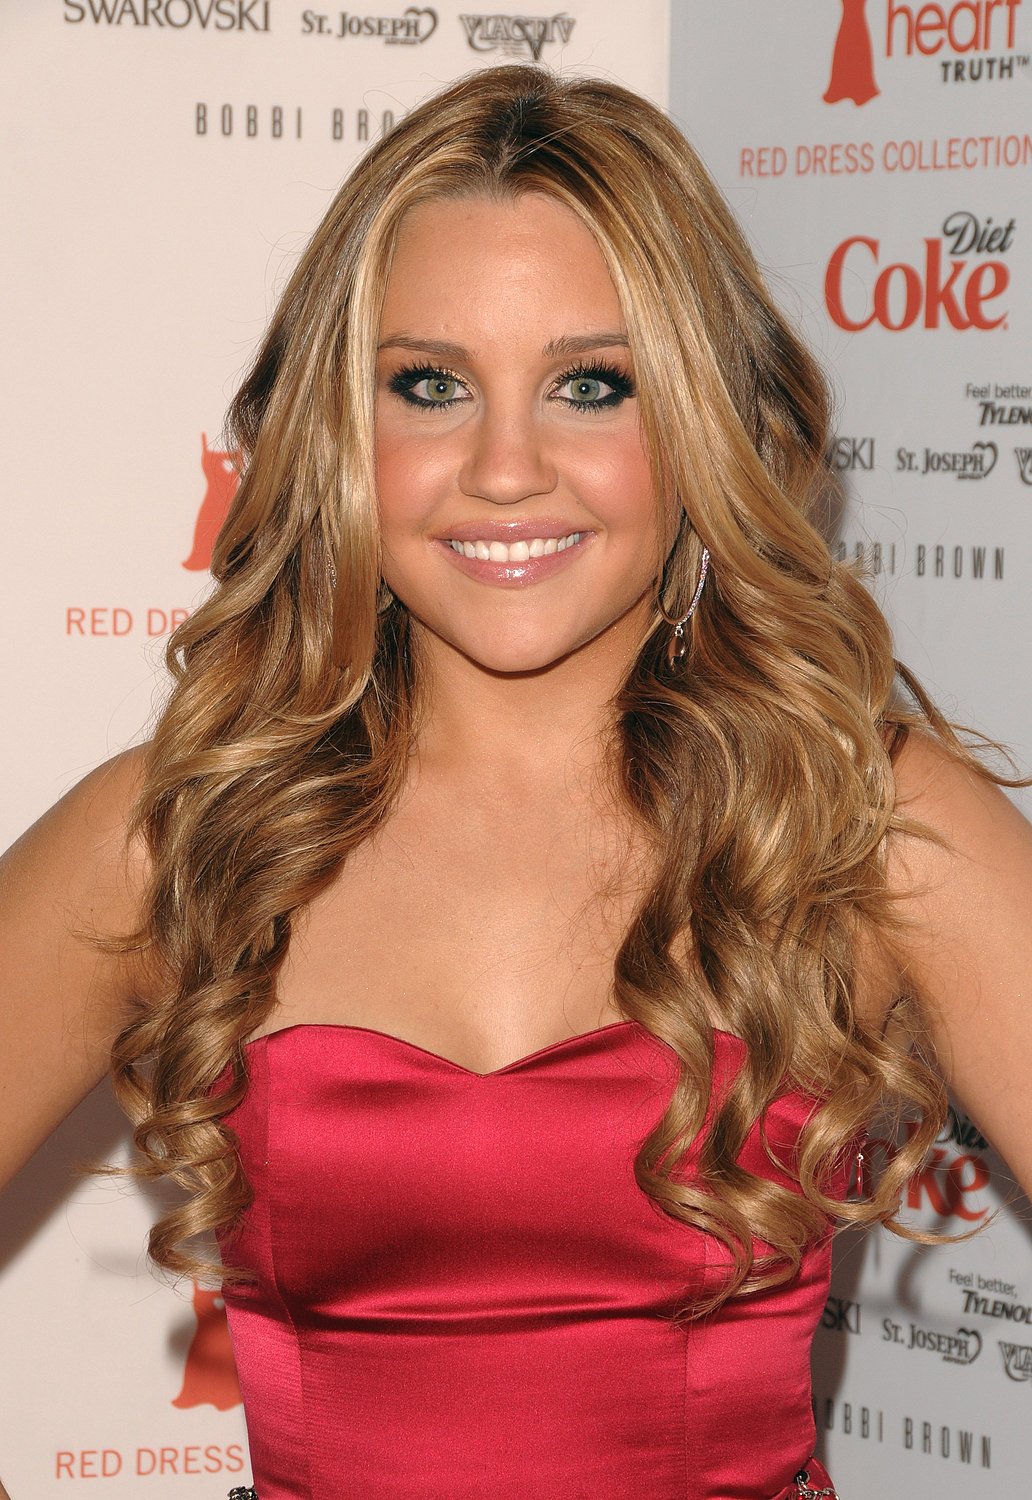 SEXY HOT GIRL: Amanda Bynes in a short red dress1032 x 1500